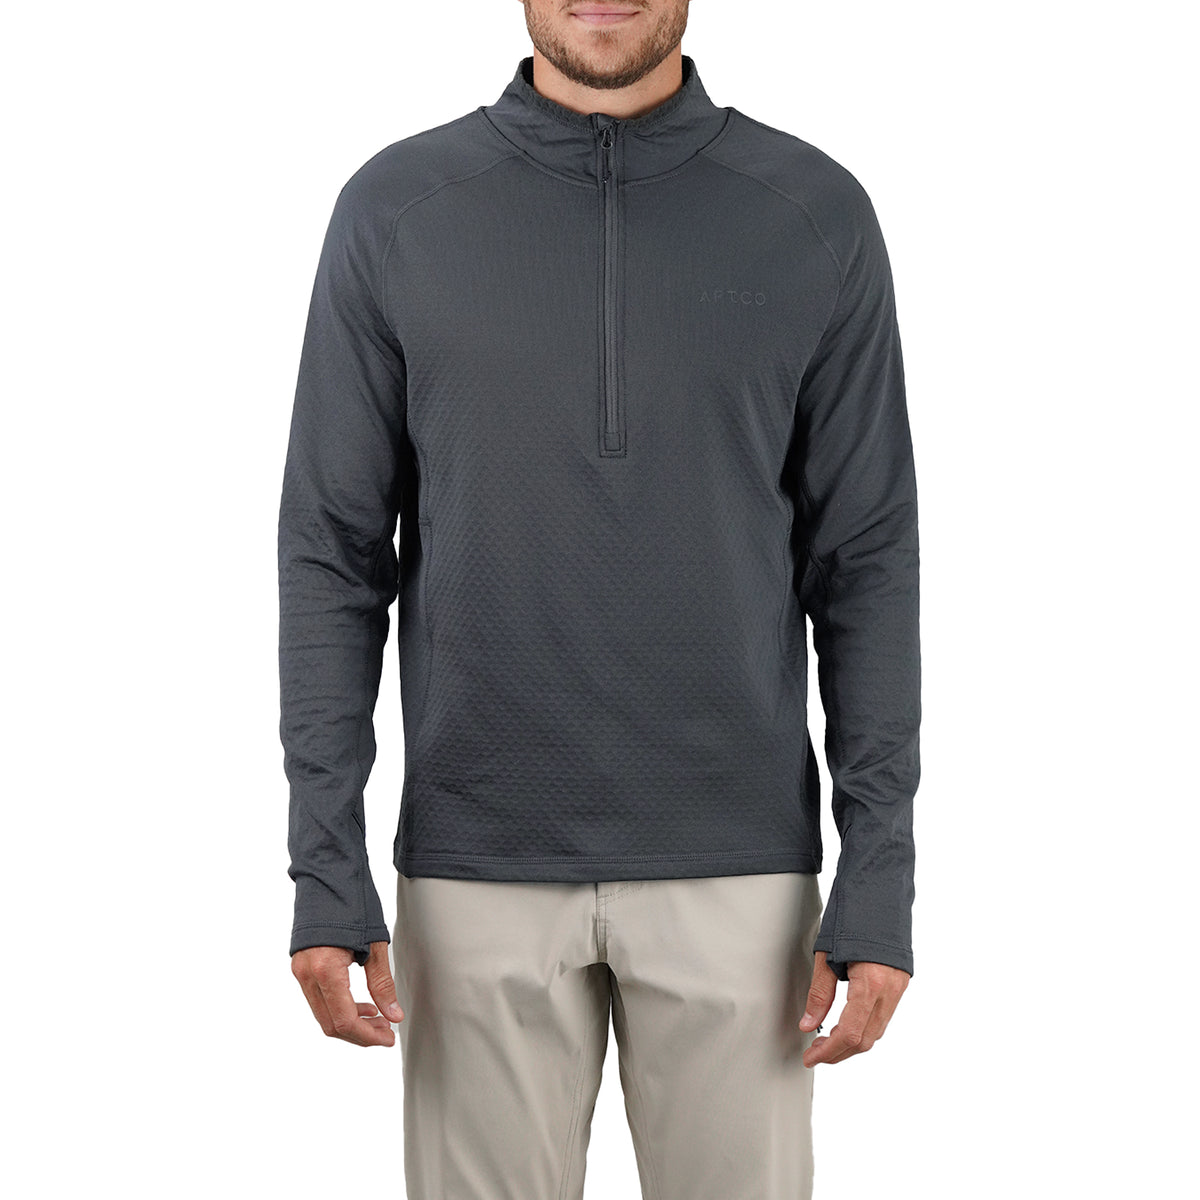 AFTCO F1 Midweight 1/4 Zip 